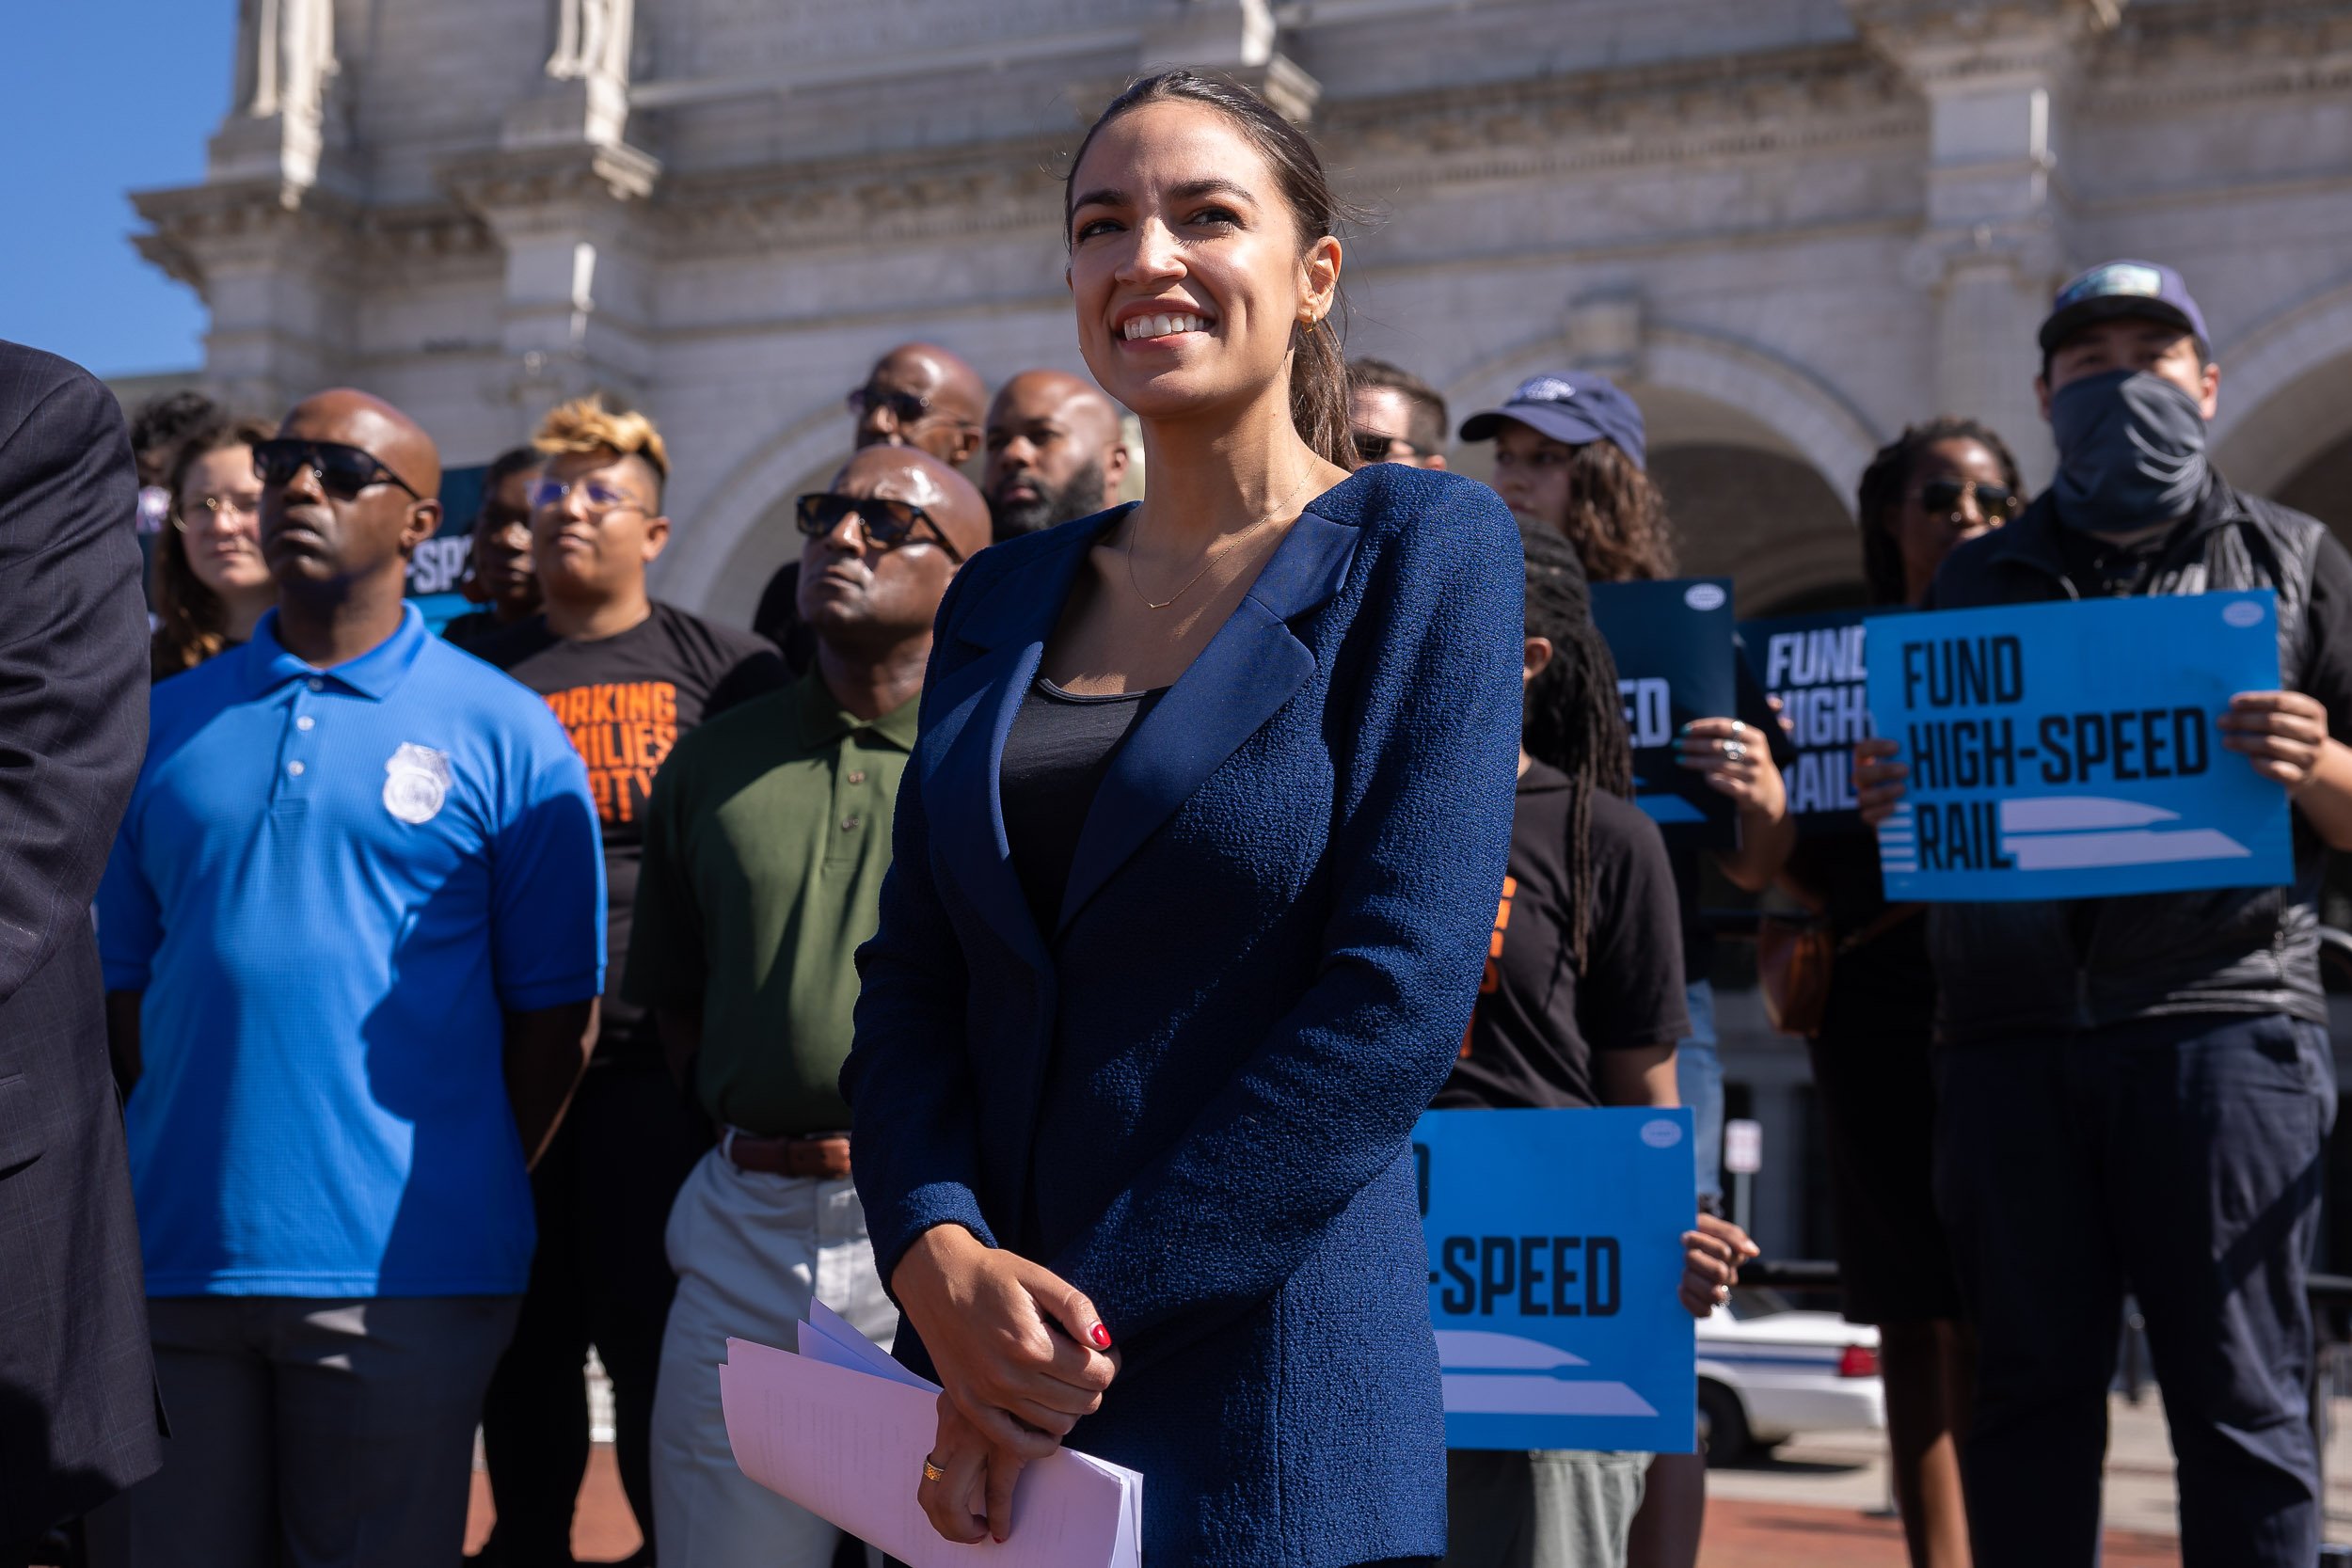  Rep. Alexandria Ocasio-Cortez (D-N.Y.) rallies in support of funding for high-speed rail with Teamsters and climate activists outside Union Station in Washington, D.C., June 16, 2021. 